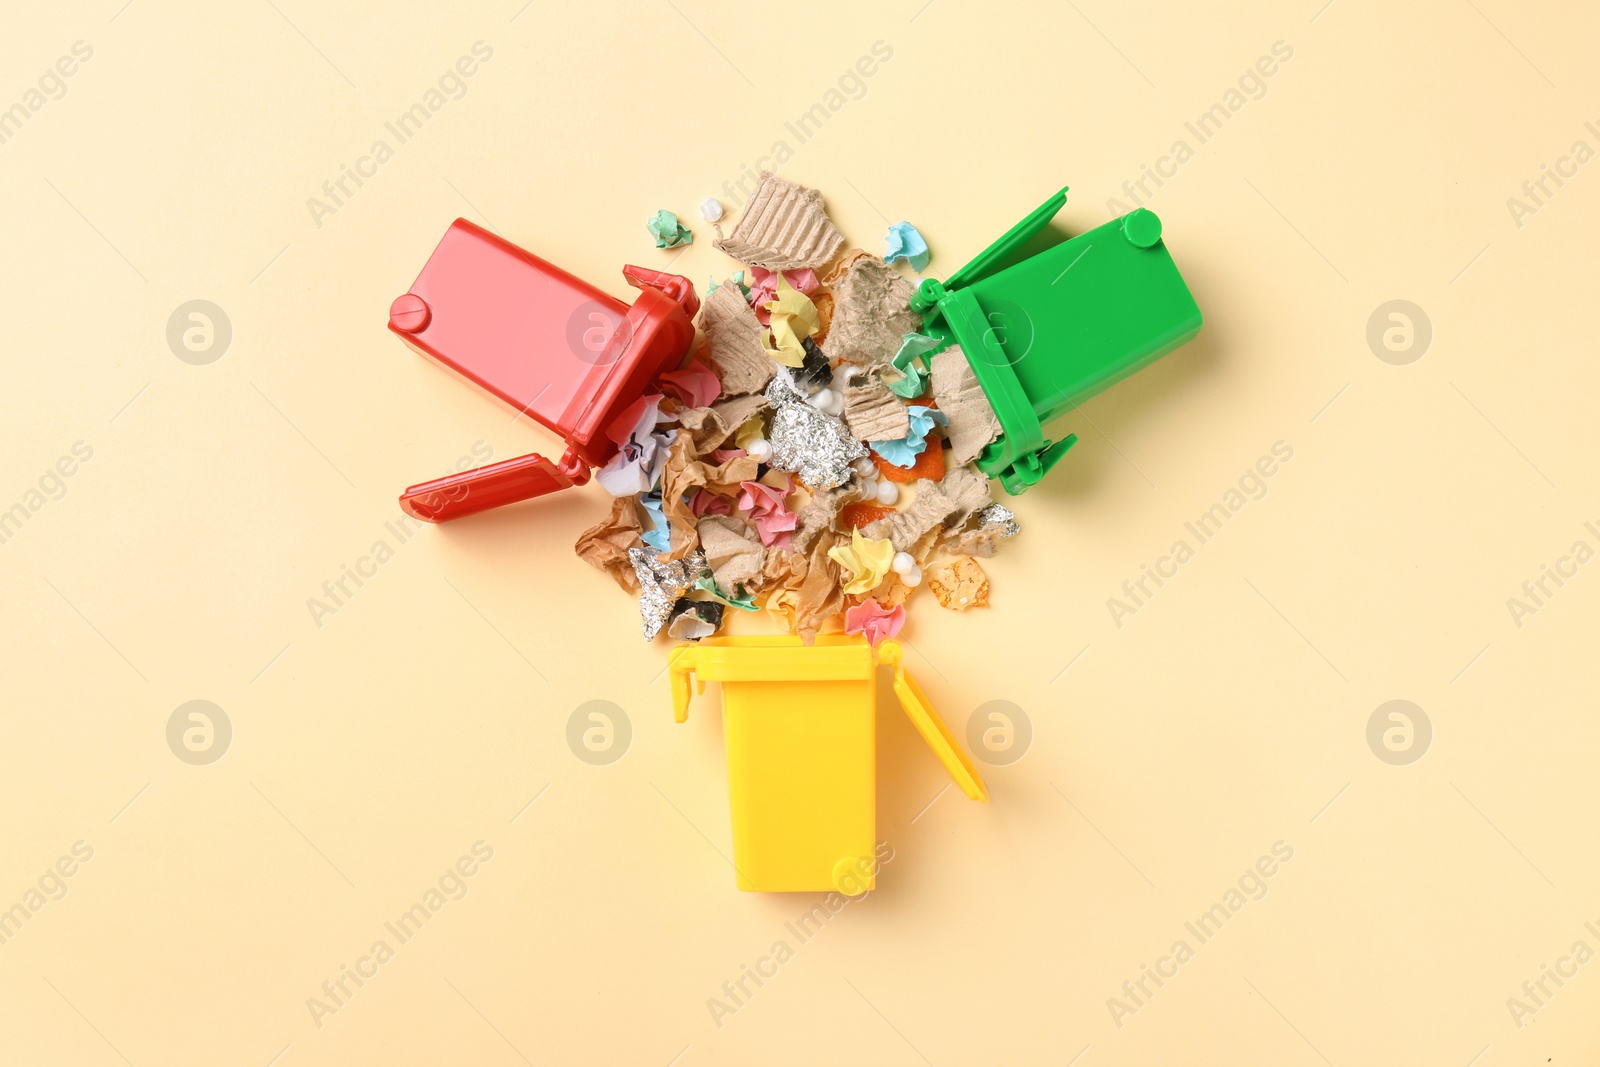 Photo of Trash bins and different garbage on color background, top view. Waste recycling concept